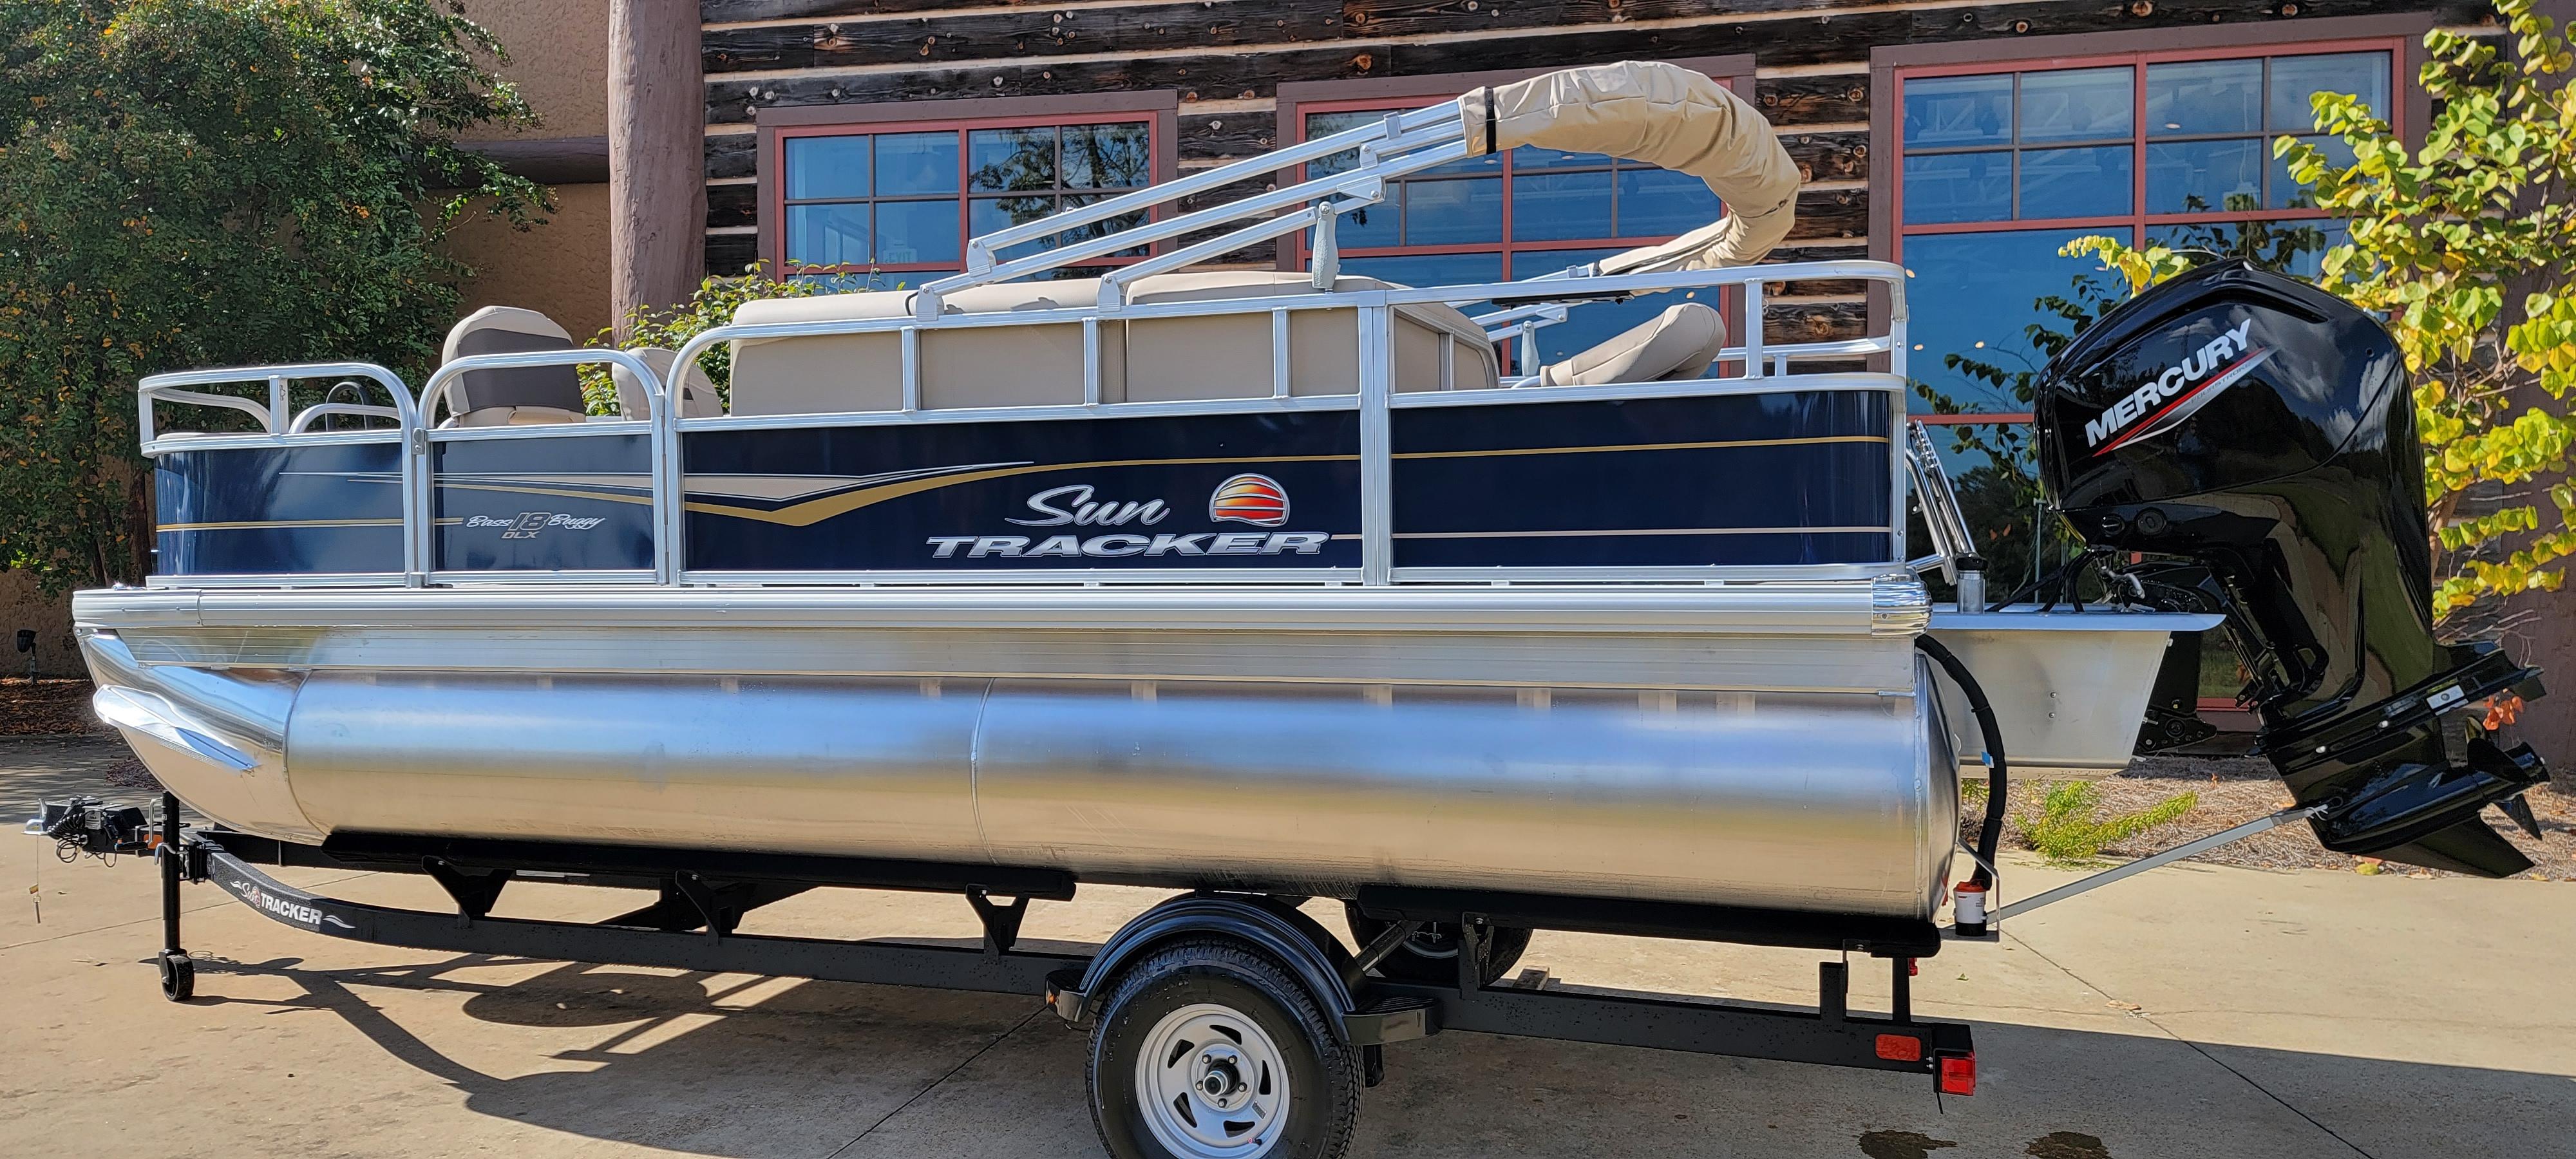 SUN TRACKER Build a Boat - Build and Price Fishing Pontoon Boats